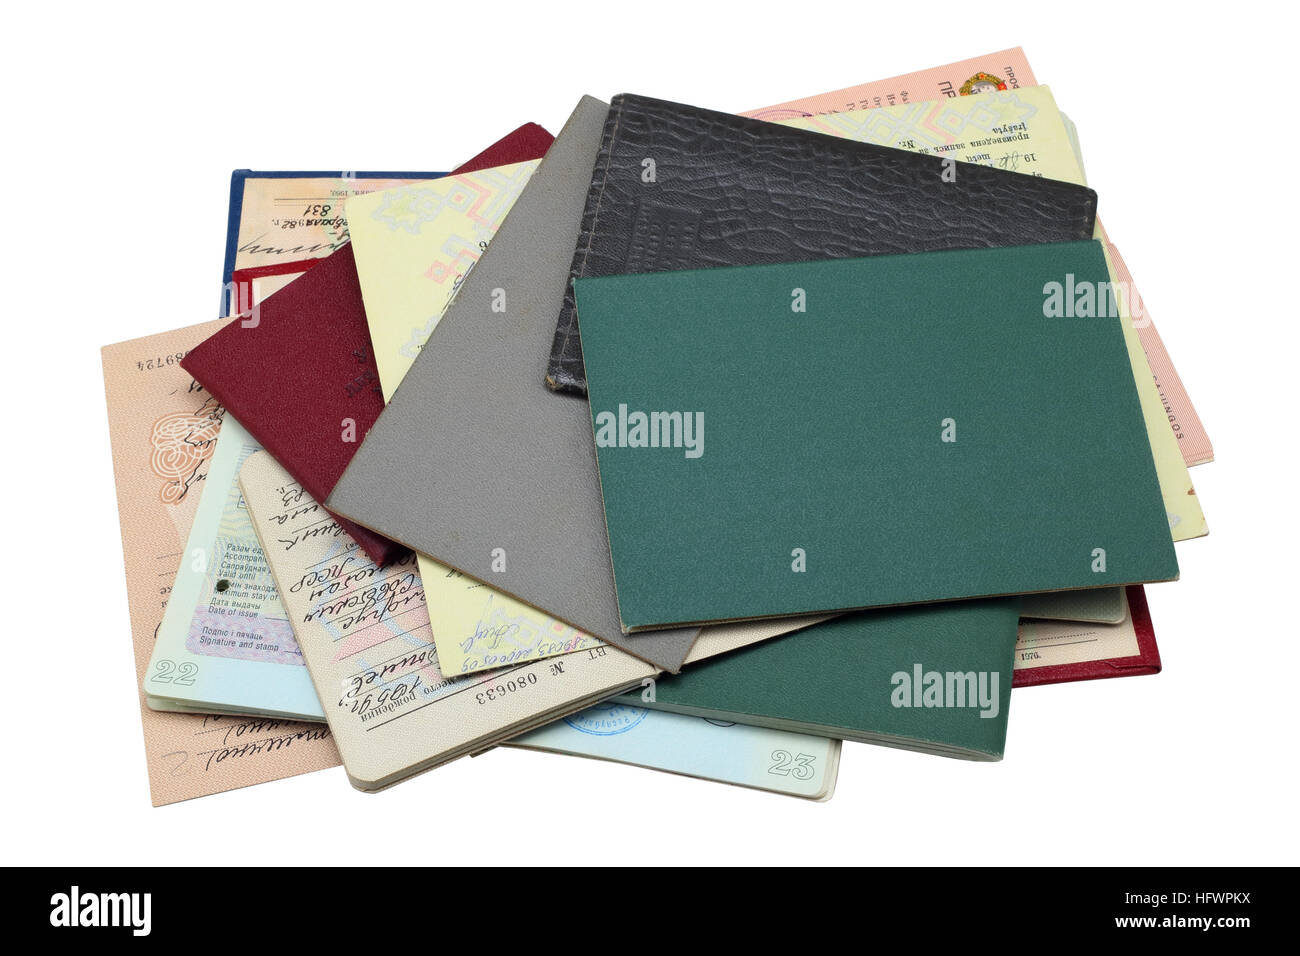 Pile of ancient personal illegal documents.These are no name passports, diplomas, the driving license and other. Covers from imitation leather. Isolat Stock Photo